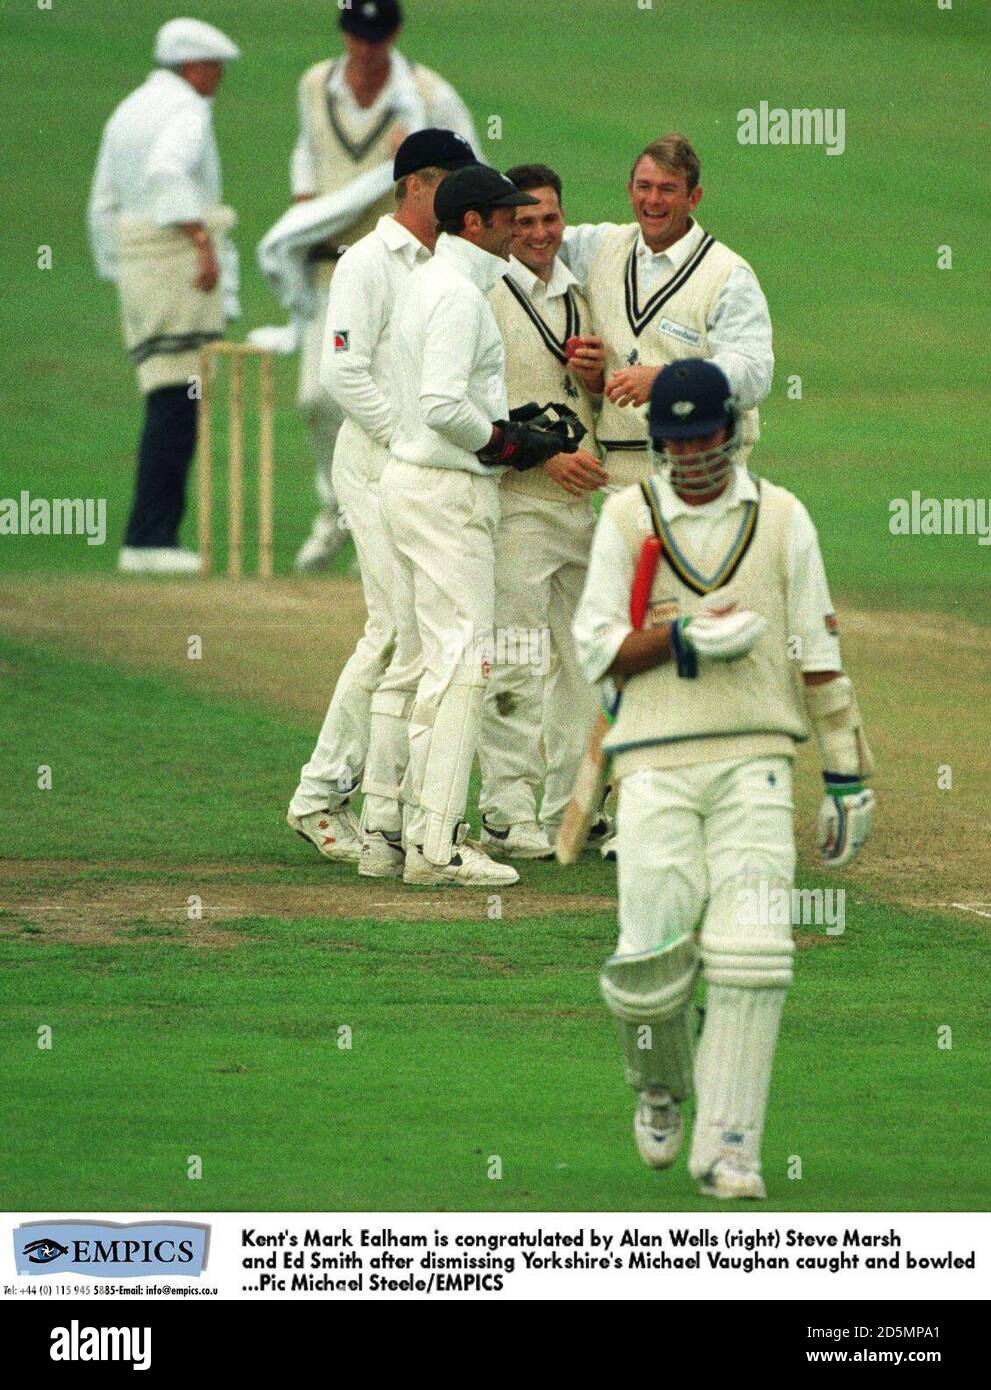 Kent's Mark Ealham (centre) is congratulated by Alan Wells (right), Steve Marsh (second from left) and Ed Smith (left) after dismissing Yorkshire's Michael Vaughan (front) caught and bowled Stock Photo